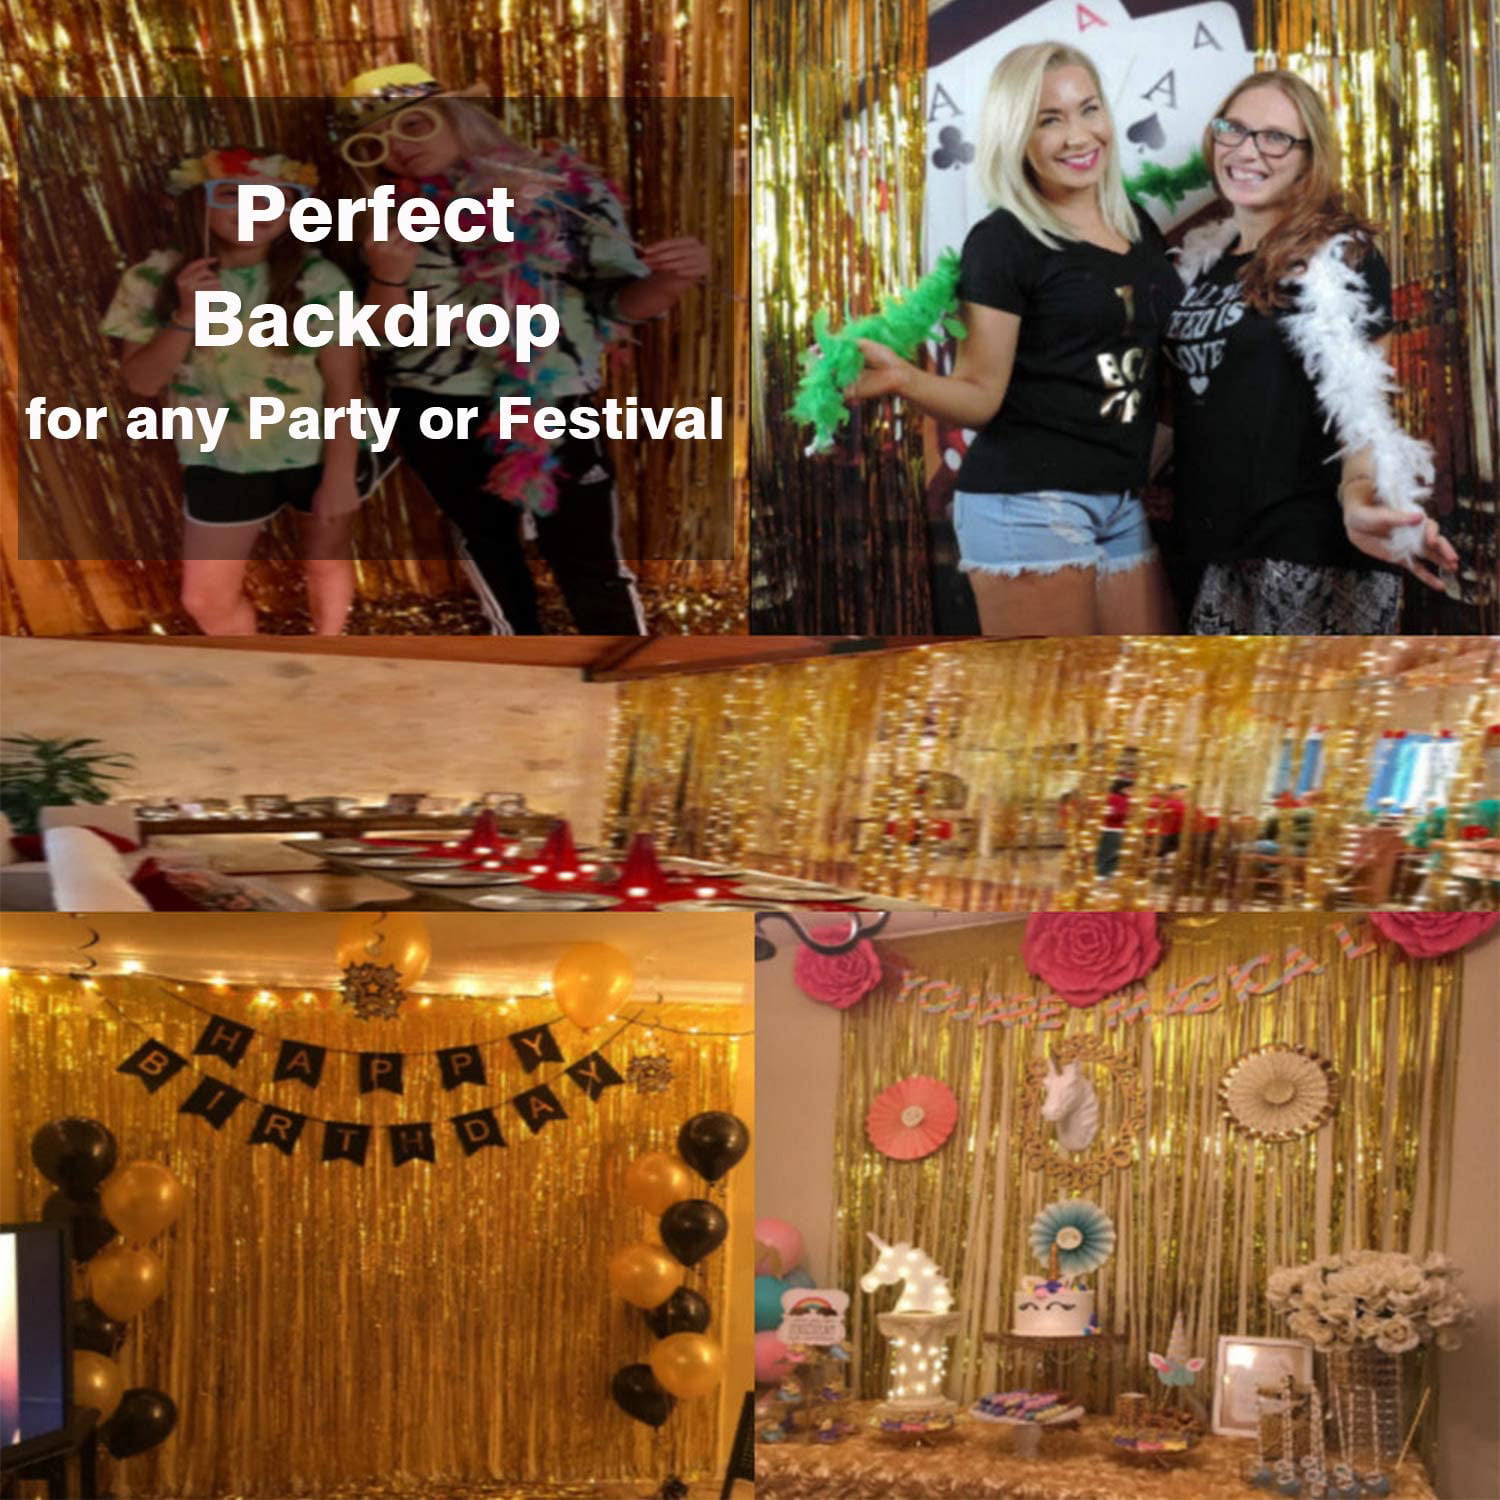  Sparkle Gold Aluminum Foil Tassel Curtain, 3.28 ft x 6.56 ft  Birthday Wedding Party Photo Booth Background Decoration (Shiny Gold, 2  Pack) : Home & Kitchen